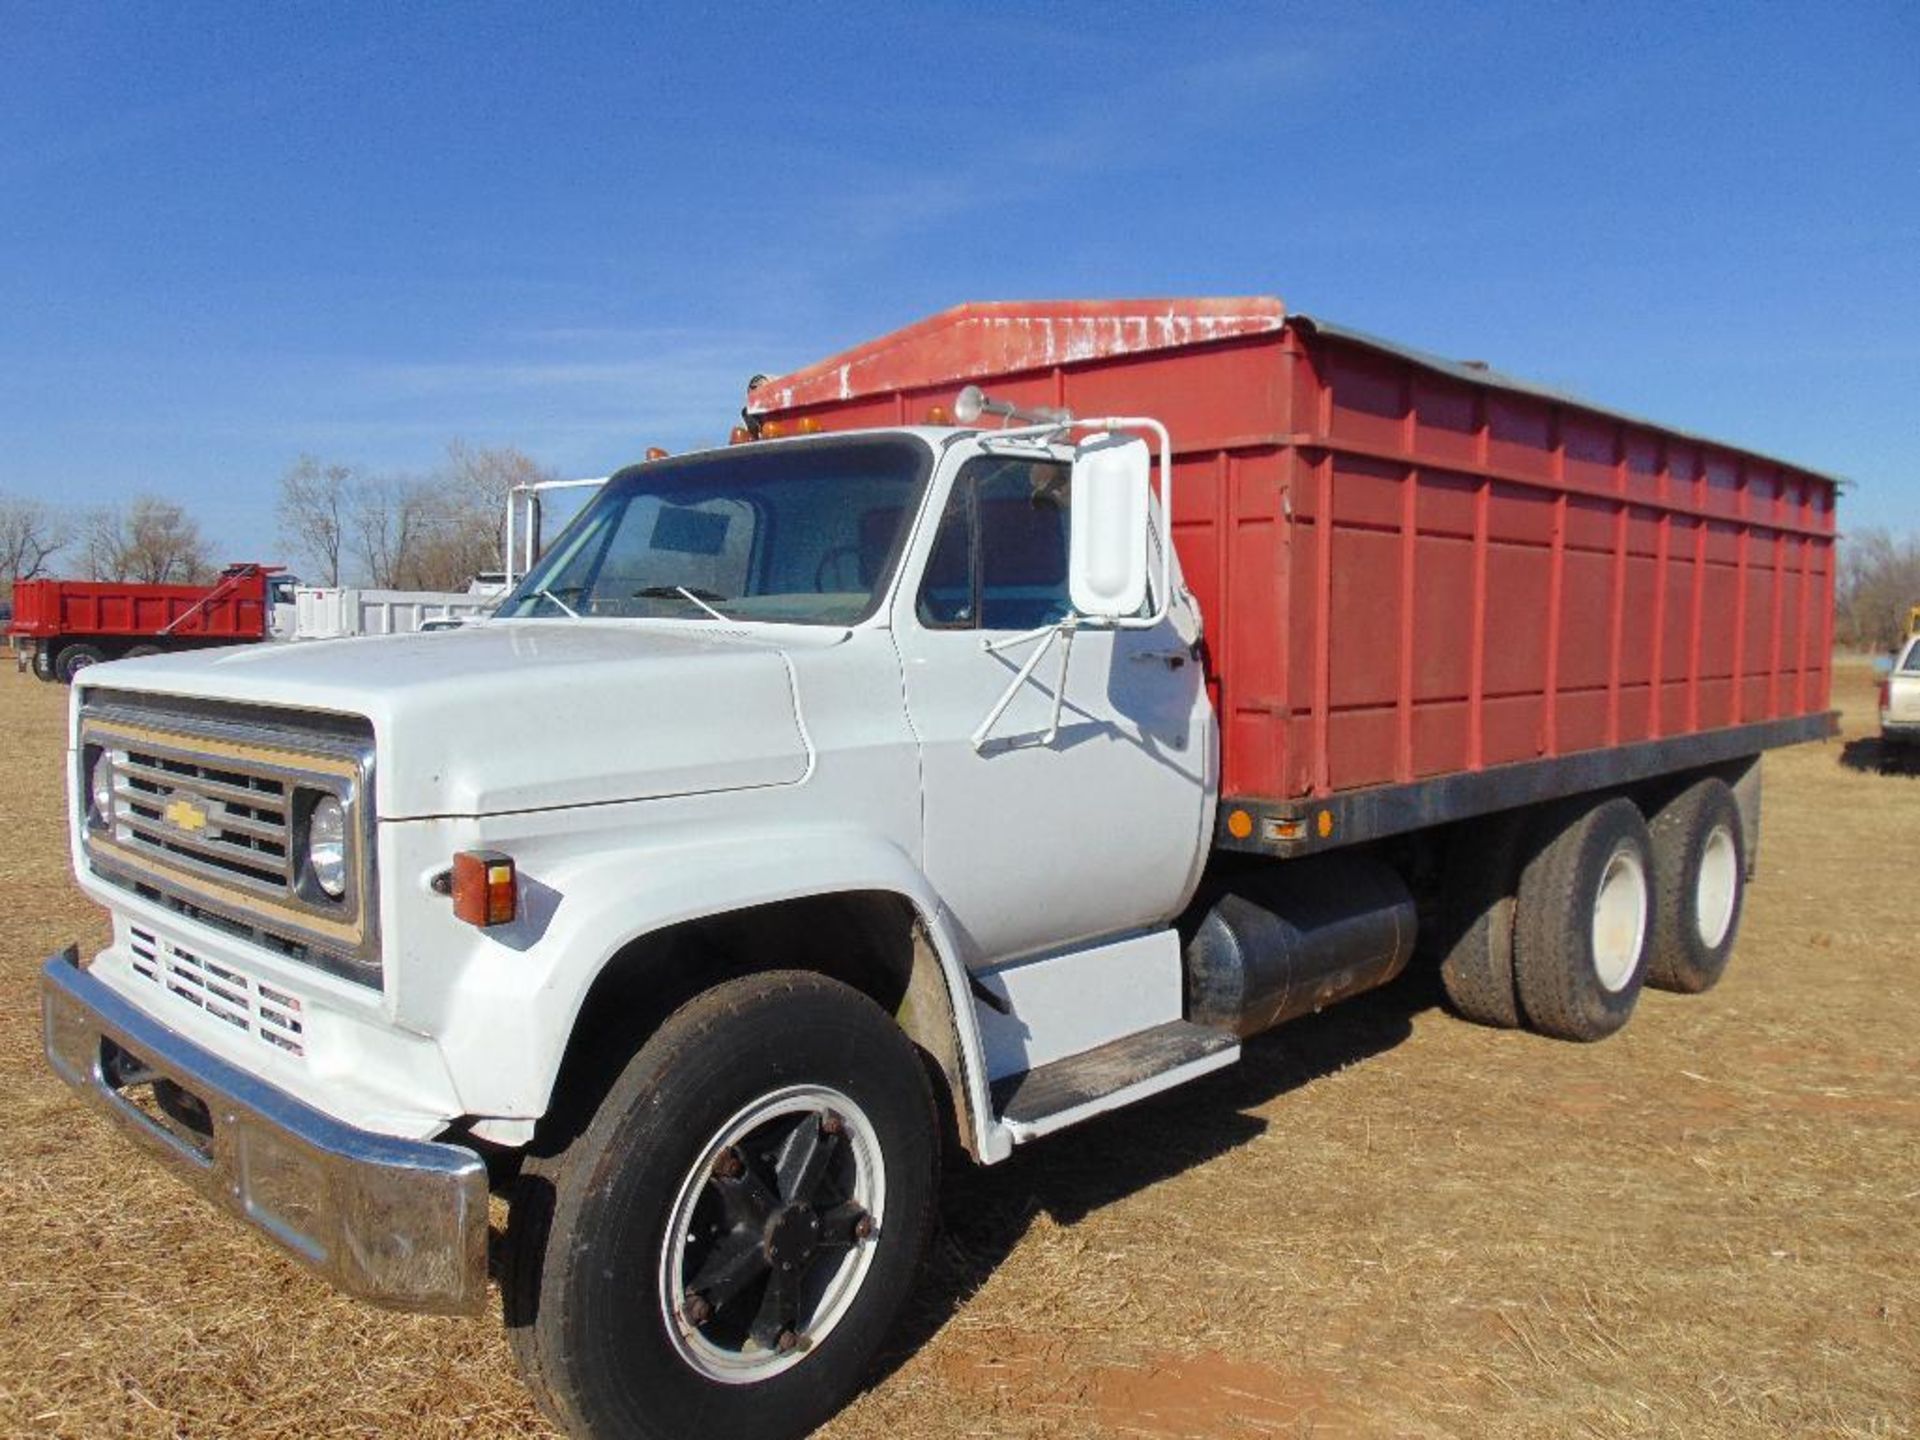 1973 Chevy 6500 T/A Grain Truck, s/n cce663v159454, 20' bed w/twin dump cylinders, grain boards, v8 - Image 3 of 8